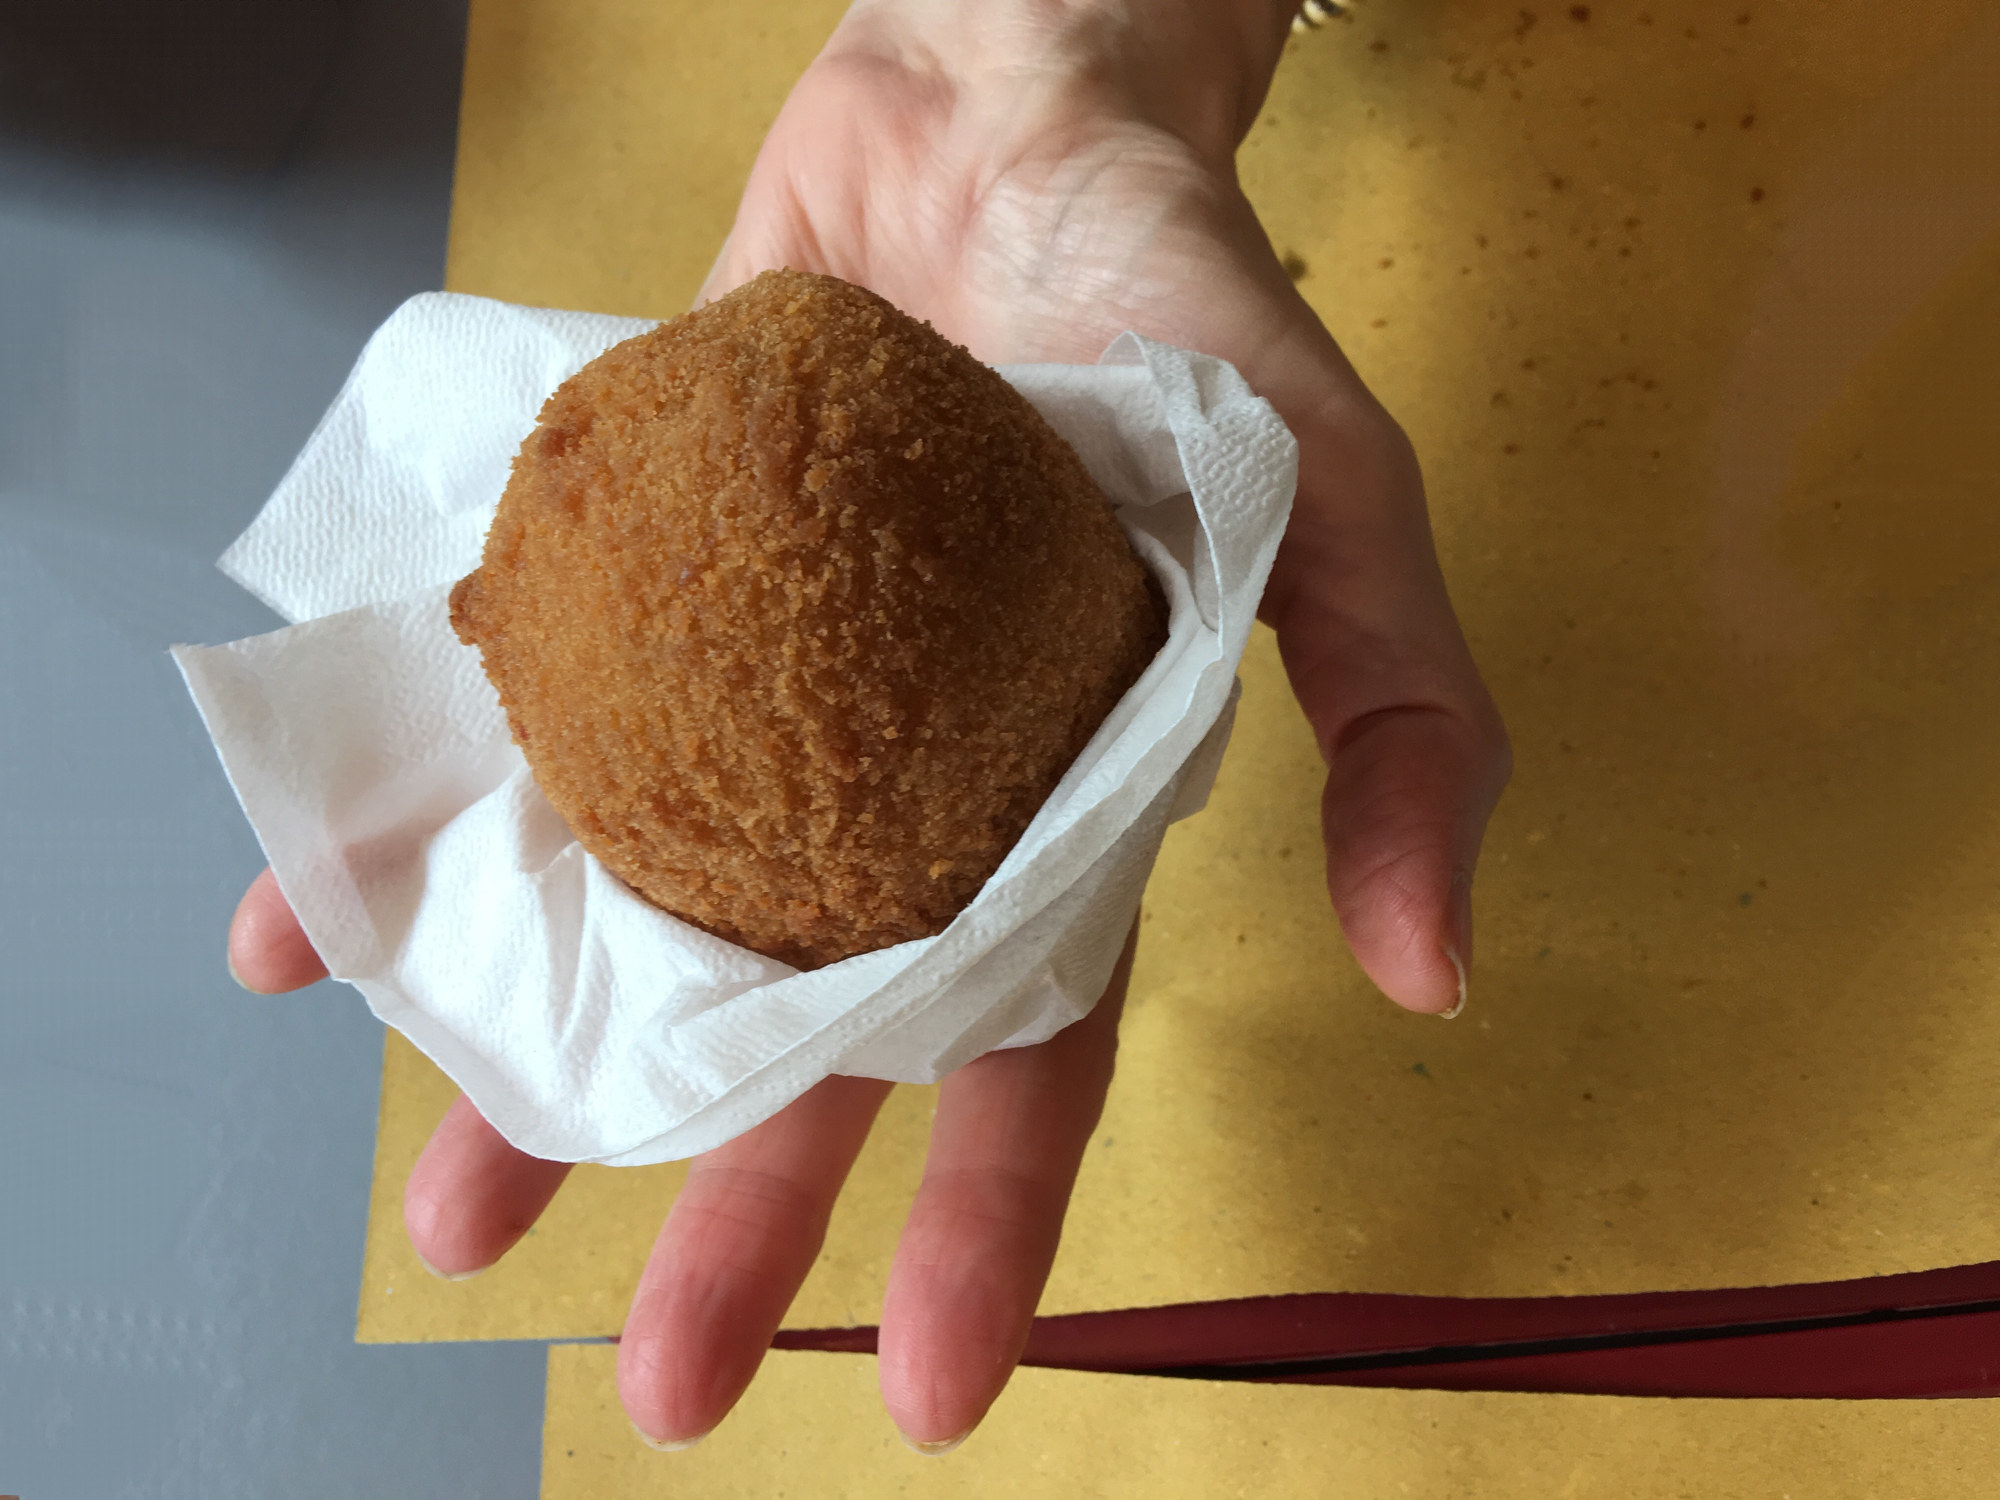 A fried rice ball in a hand